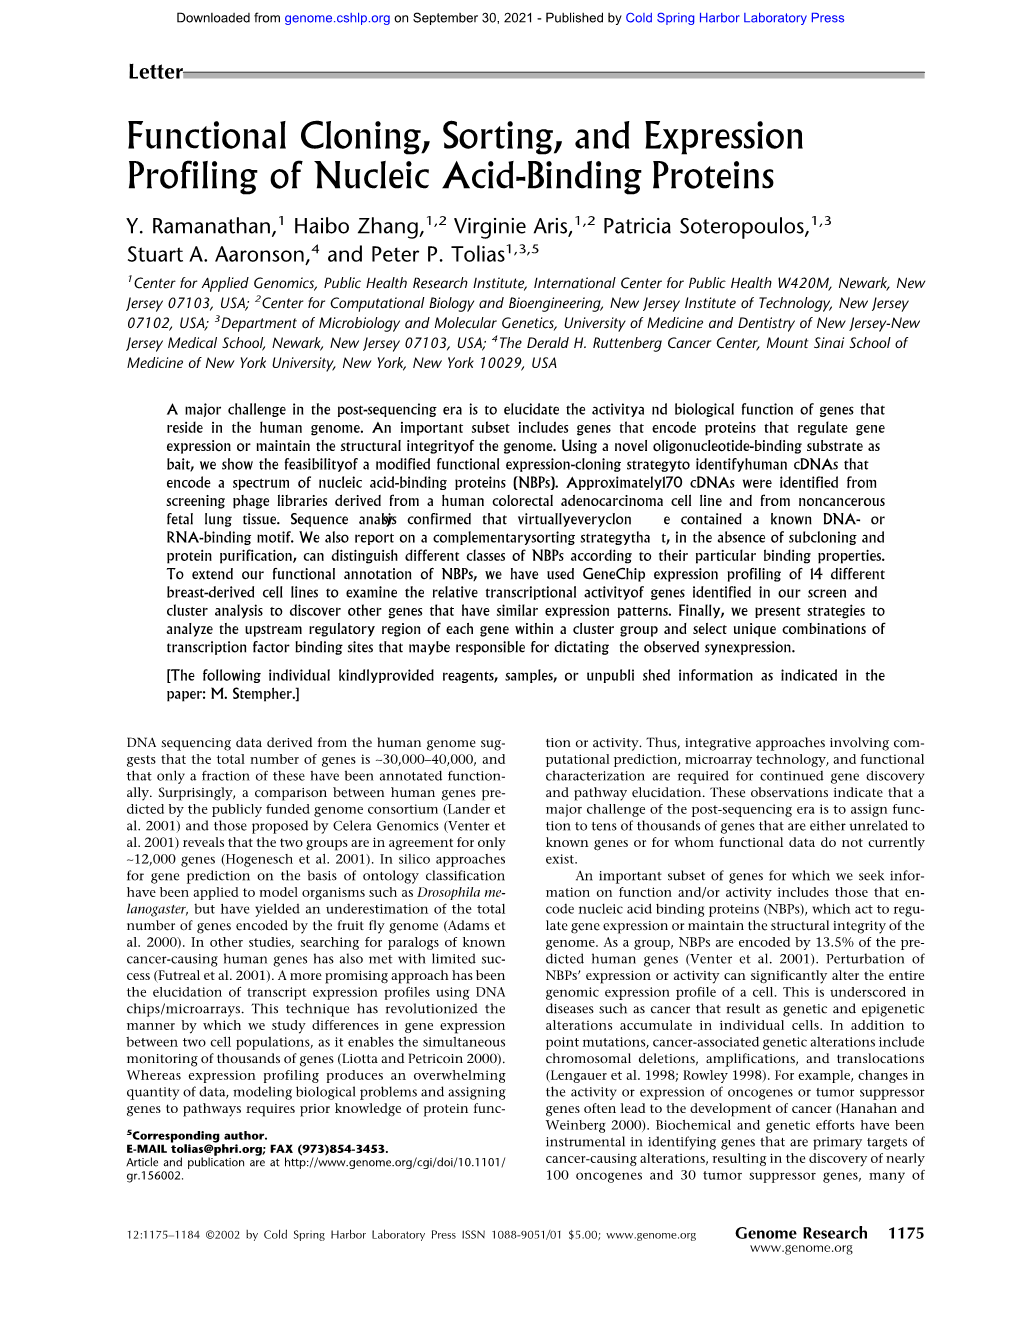 Functional Cloning, Sorting, and Expression Profiling of Nucleic Acid-Binding Proteins